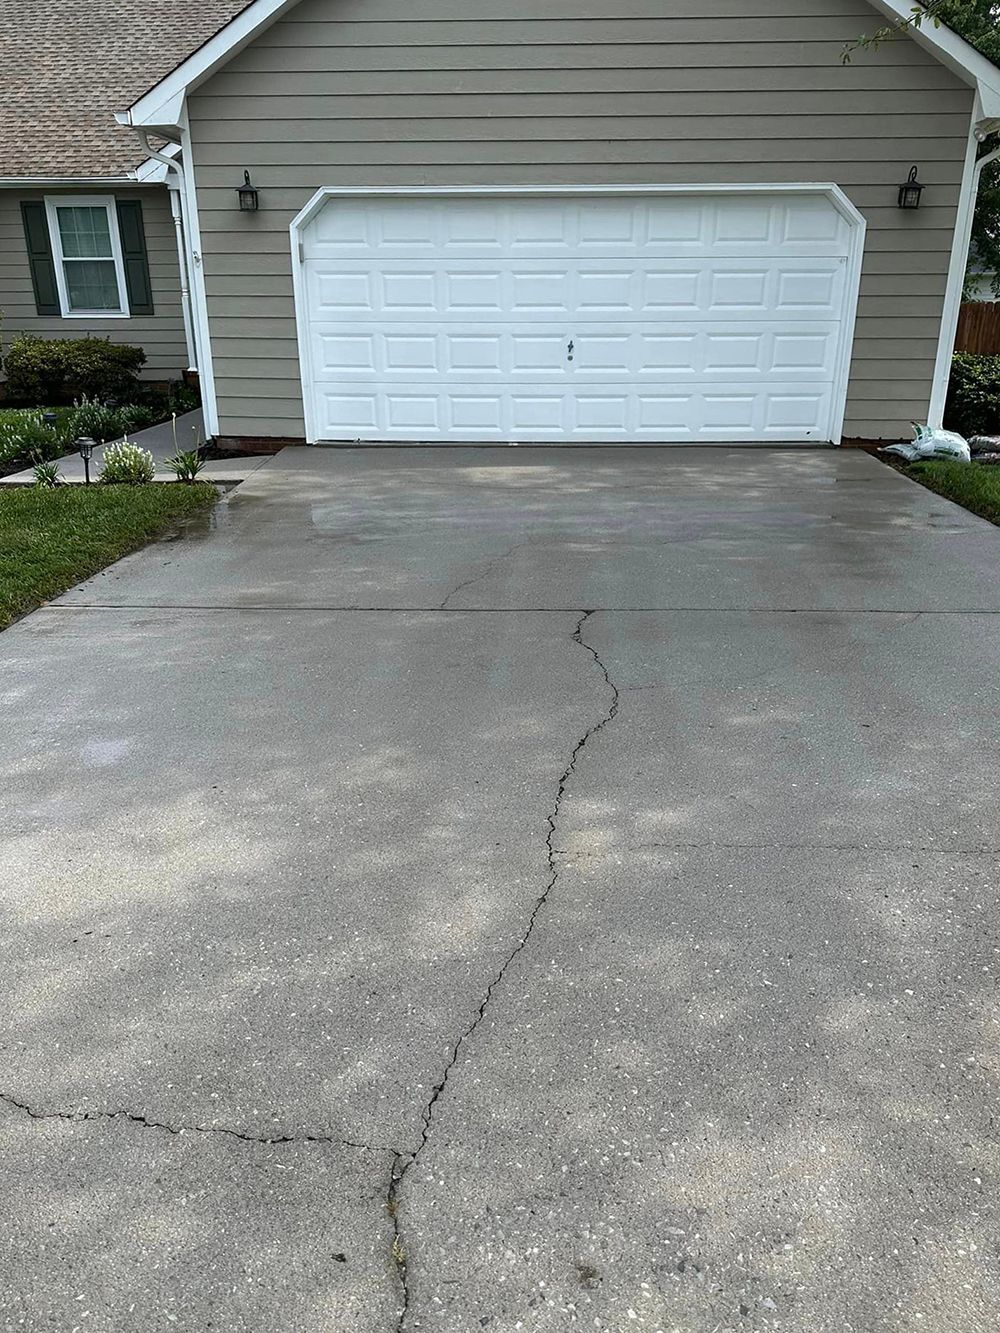 A concrete driveway in front of a house with a white garage door